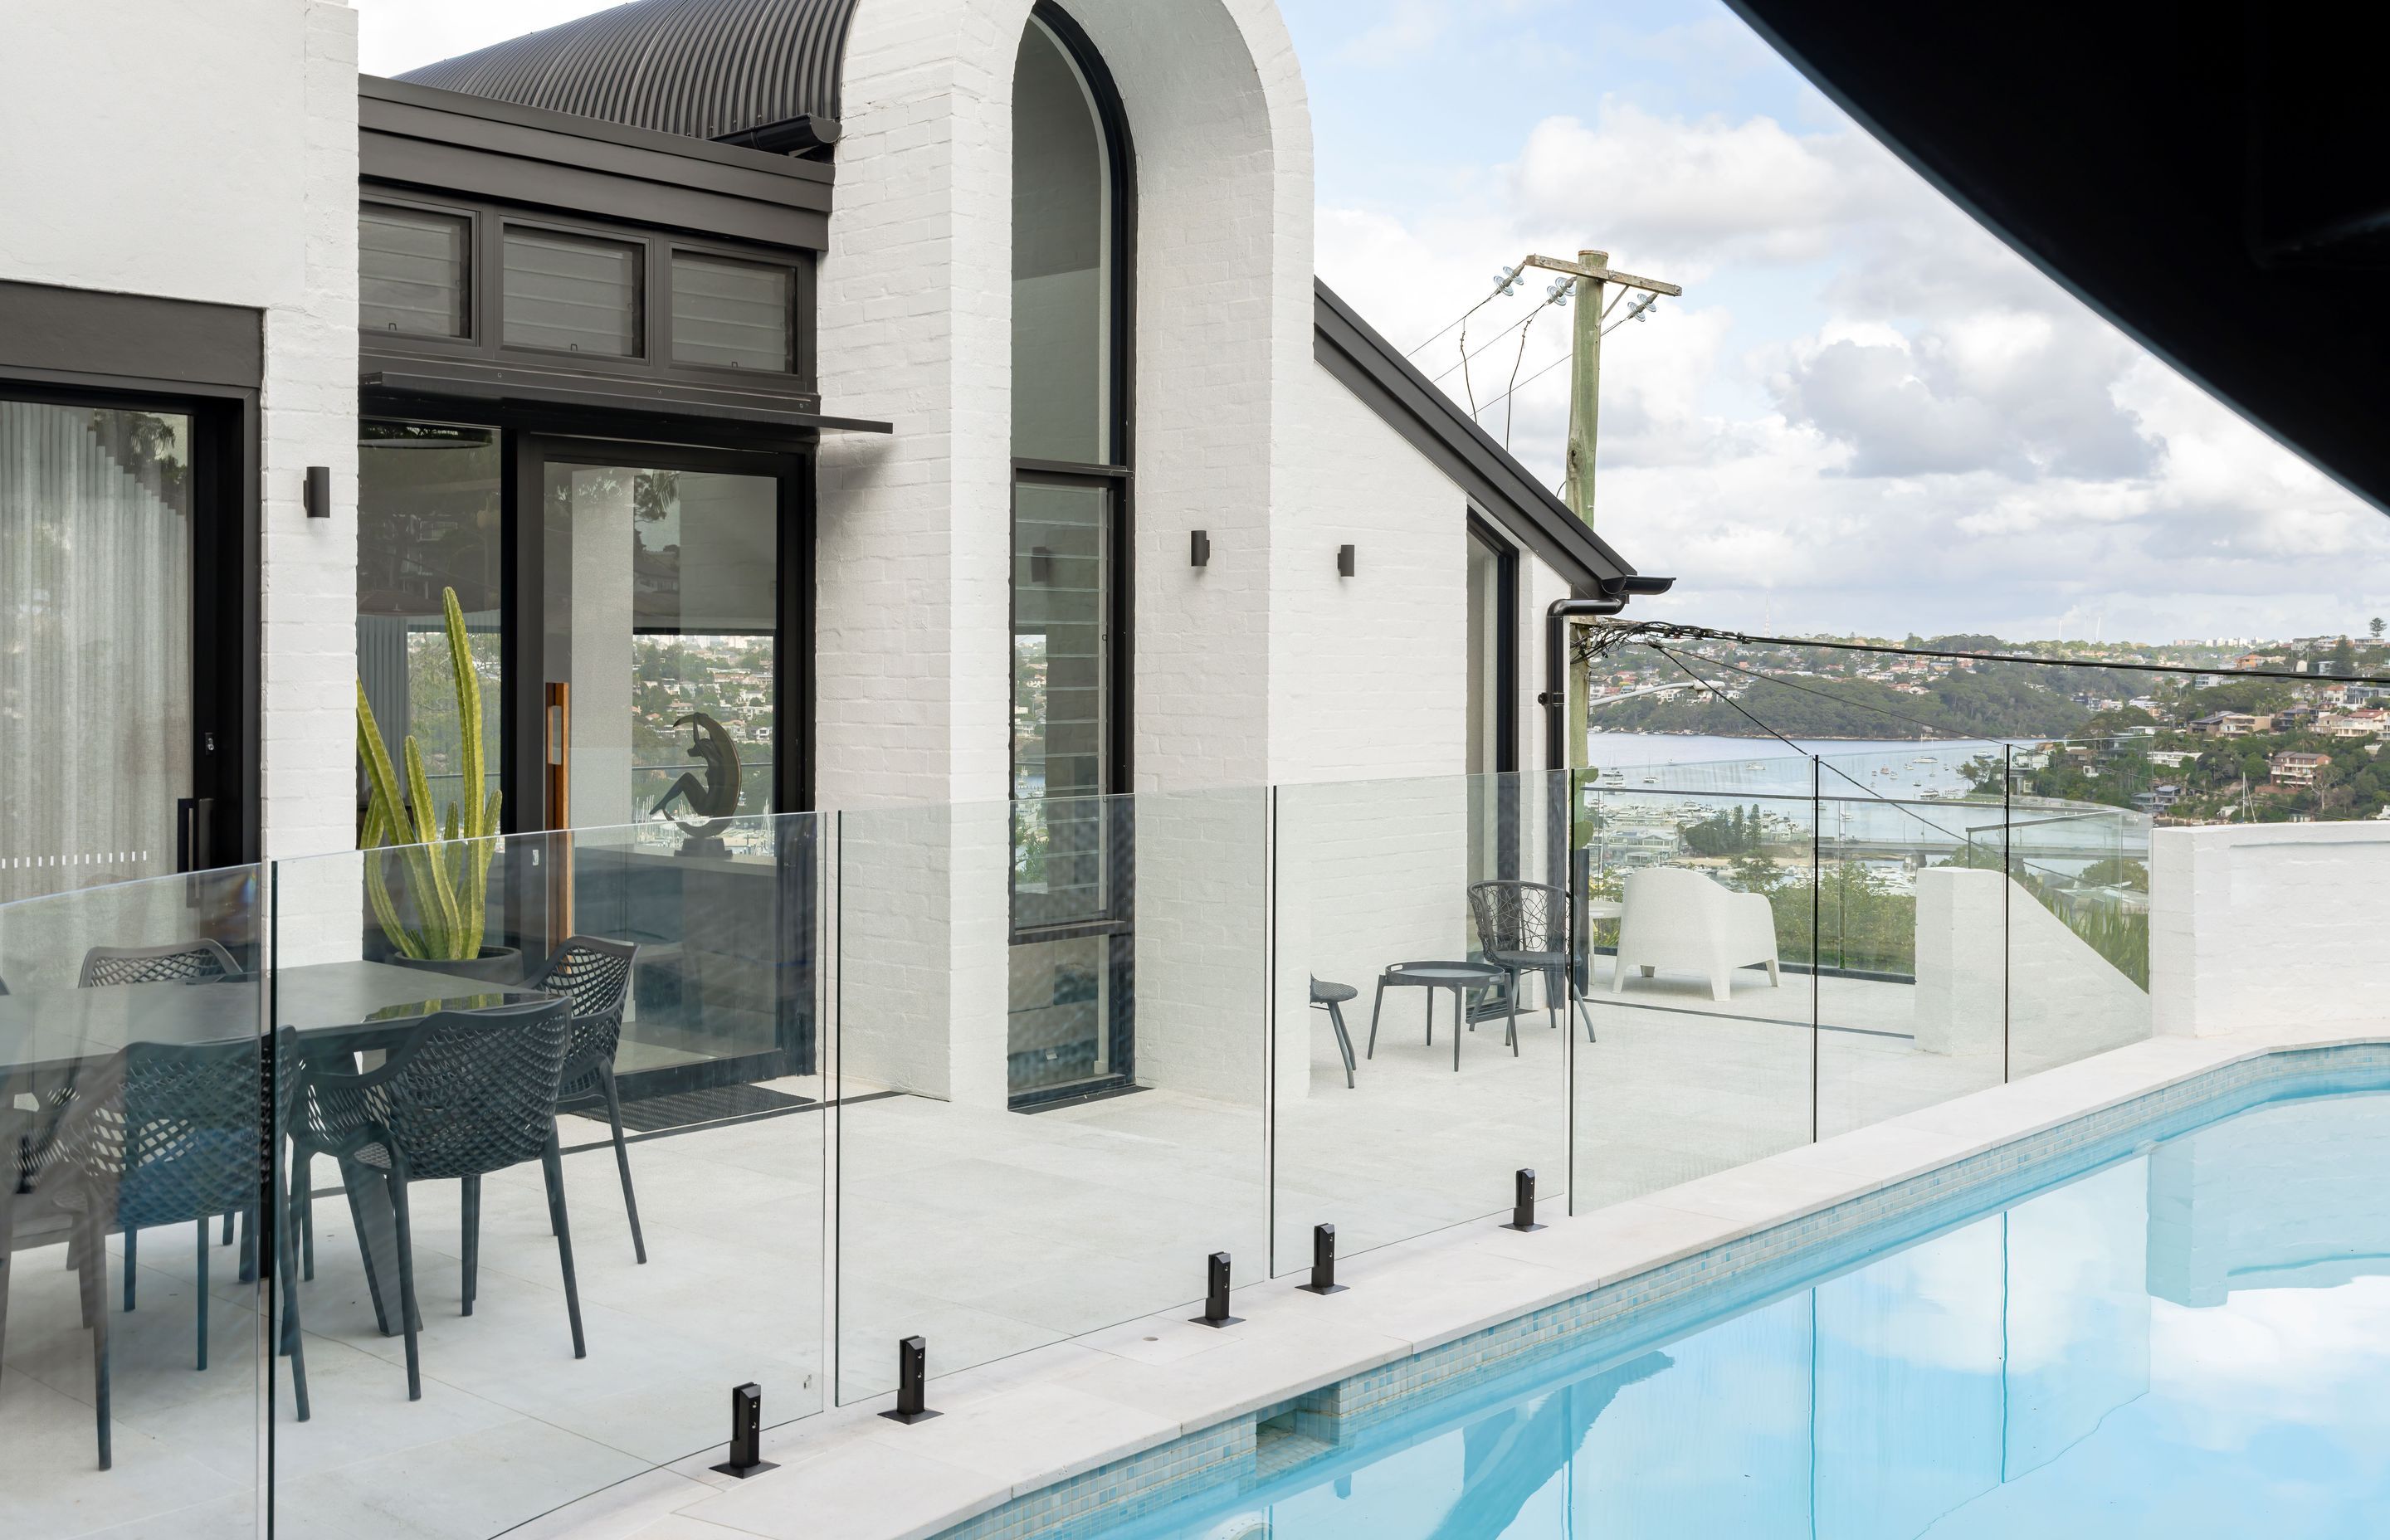 The strong monochromatic statement of this home is reflected in the pool glazing and black hardware by Glazed Co.